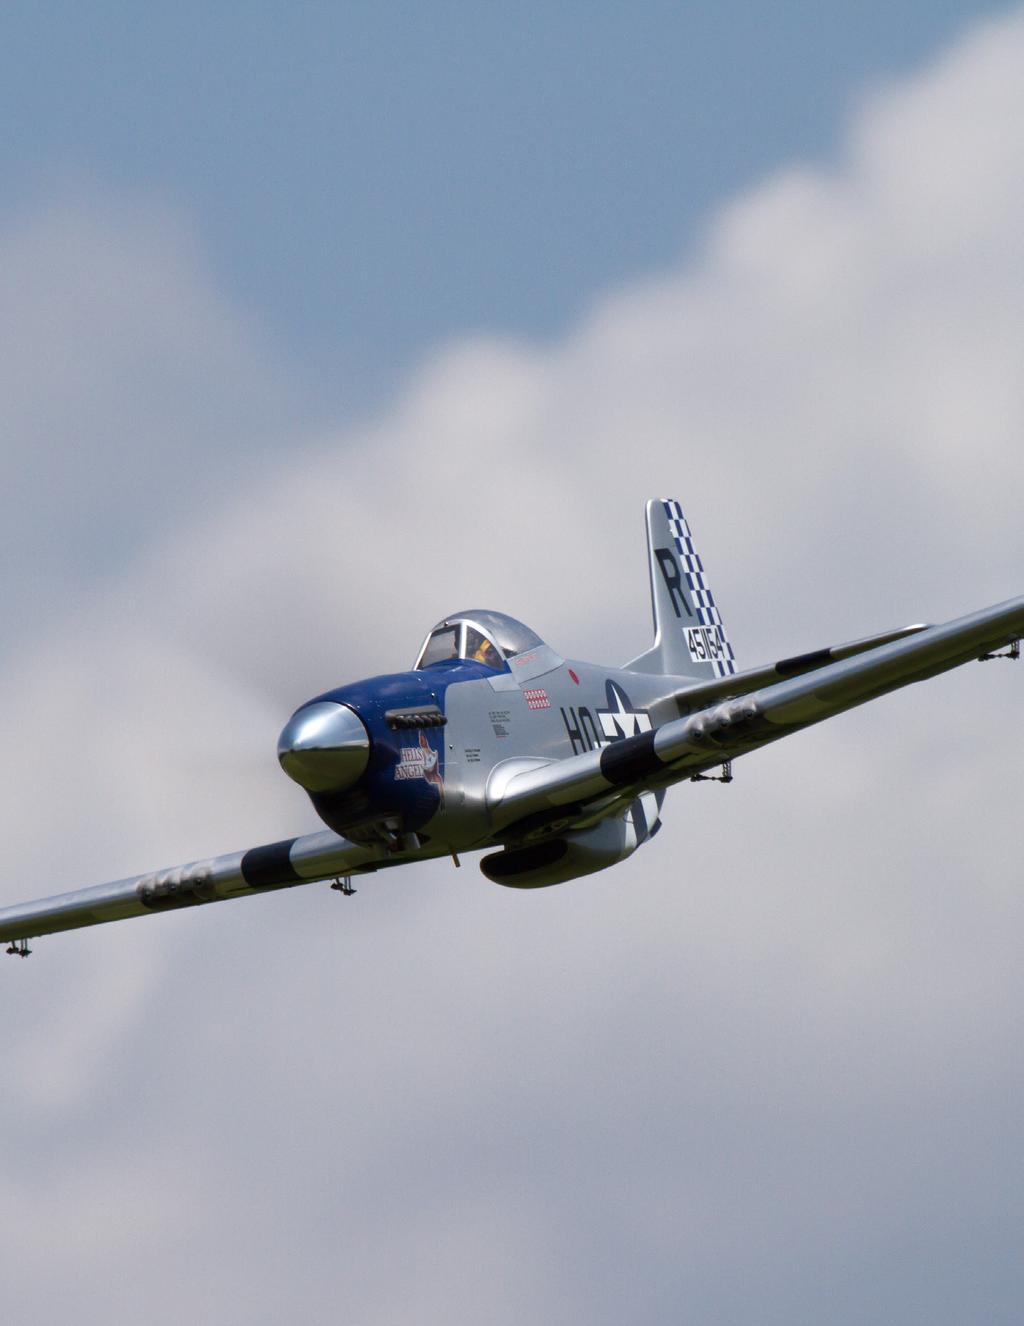 Glitch Busters July 2015 WARBIRDS OVER DELAWARE ʻNUFF SAID National Model Aviation (Community Day) August